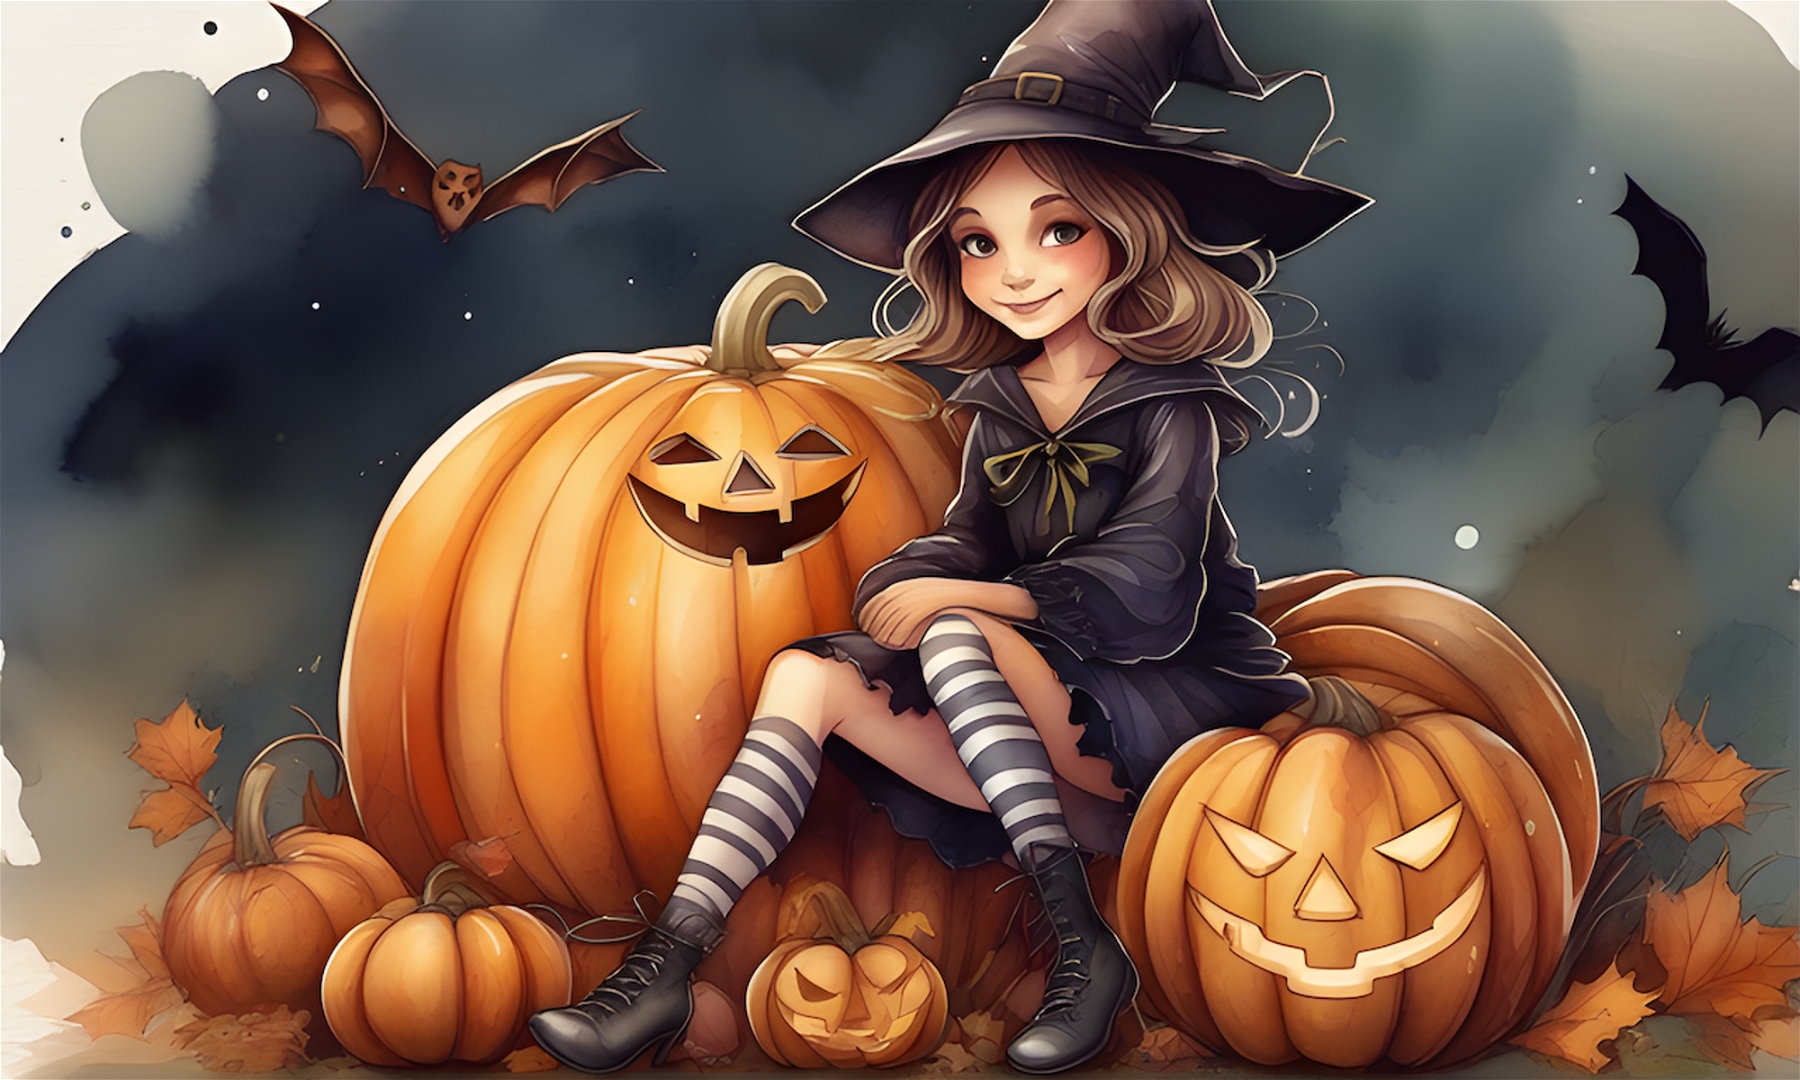 Halloween Illustration, A cute witch sitting on a big pumpkin, illustration, creepy, warm colors, highly detailed watercolor, best quality